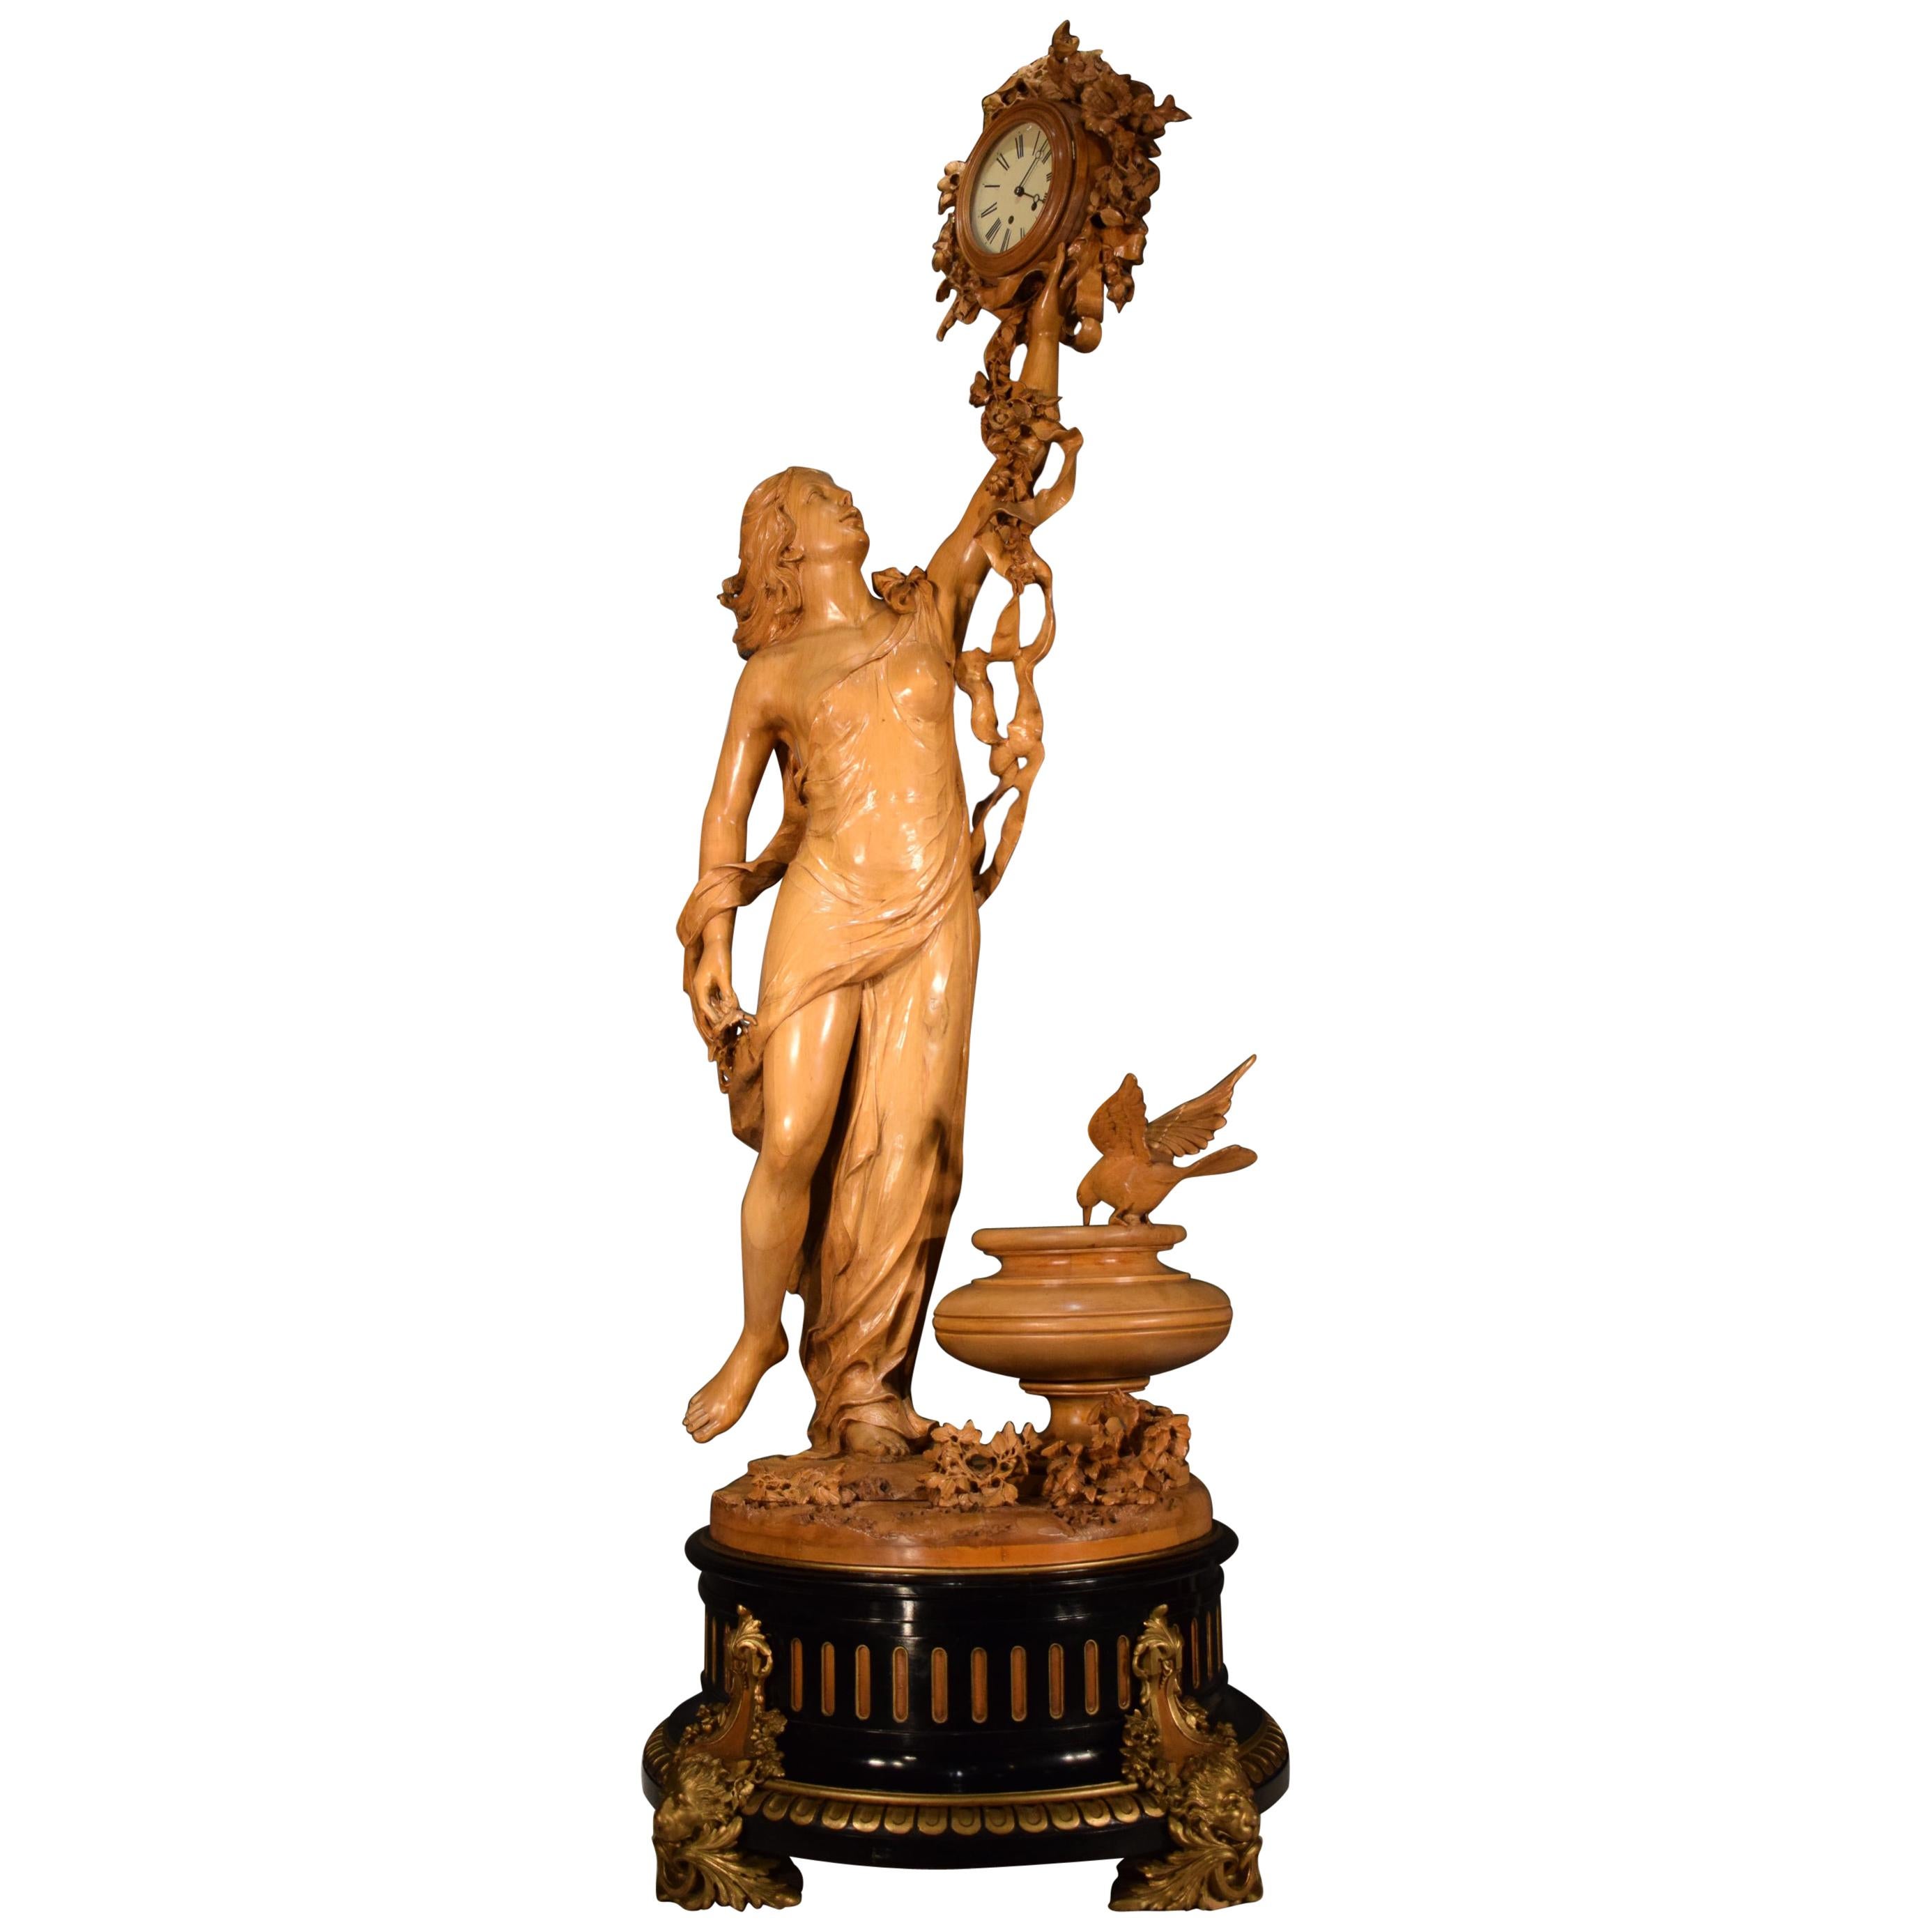 Carved Wood Figure of Woman with Clock